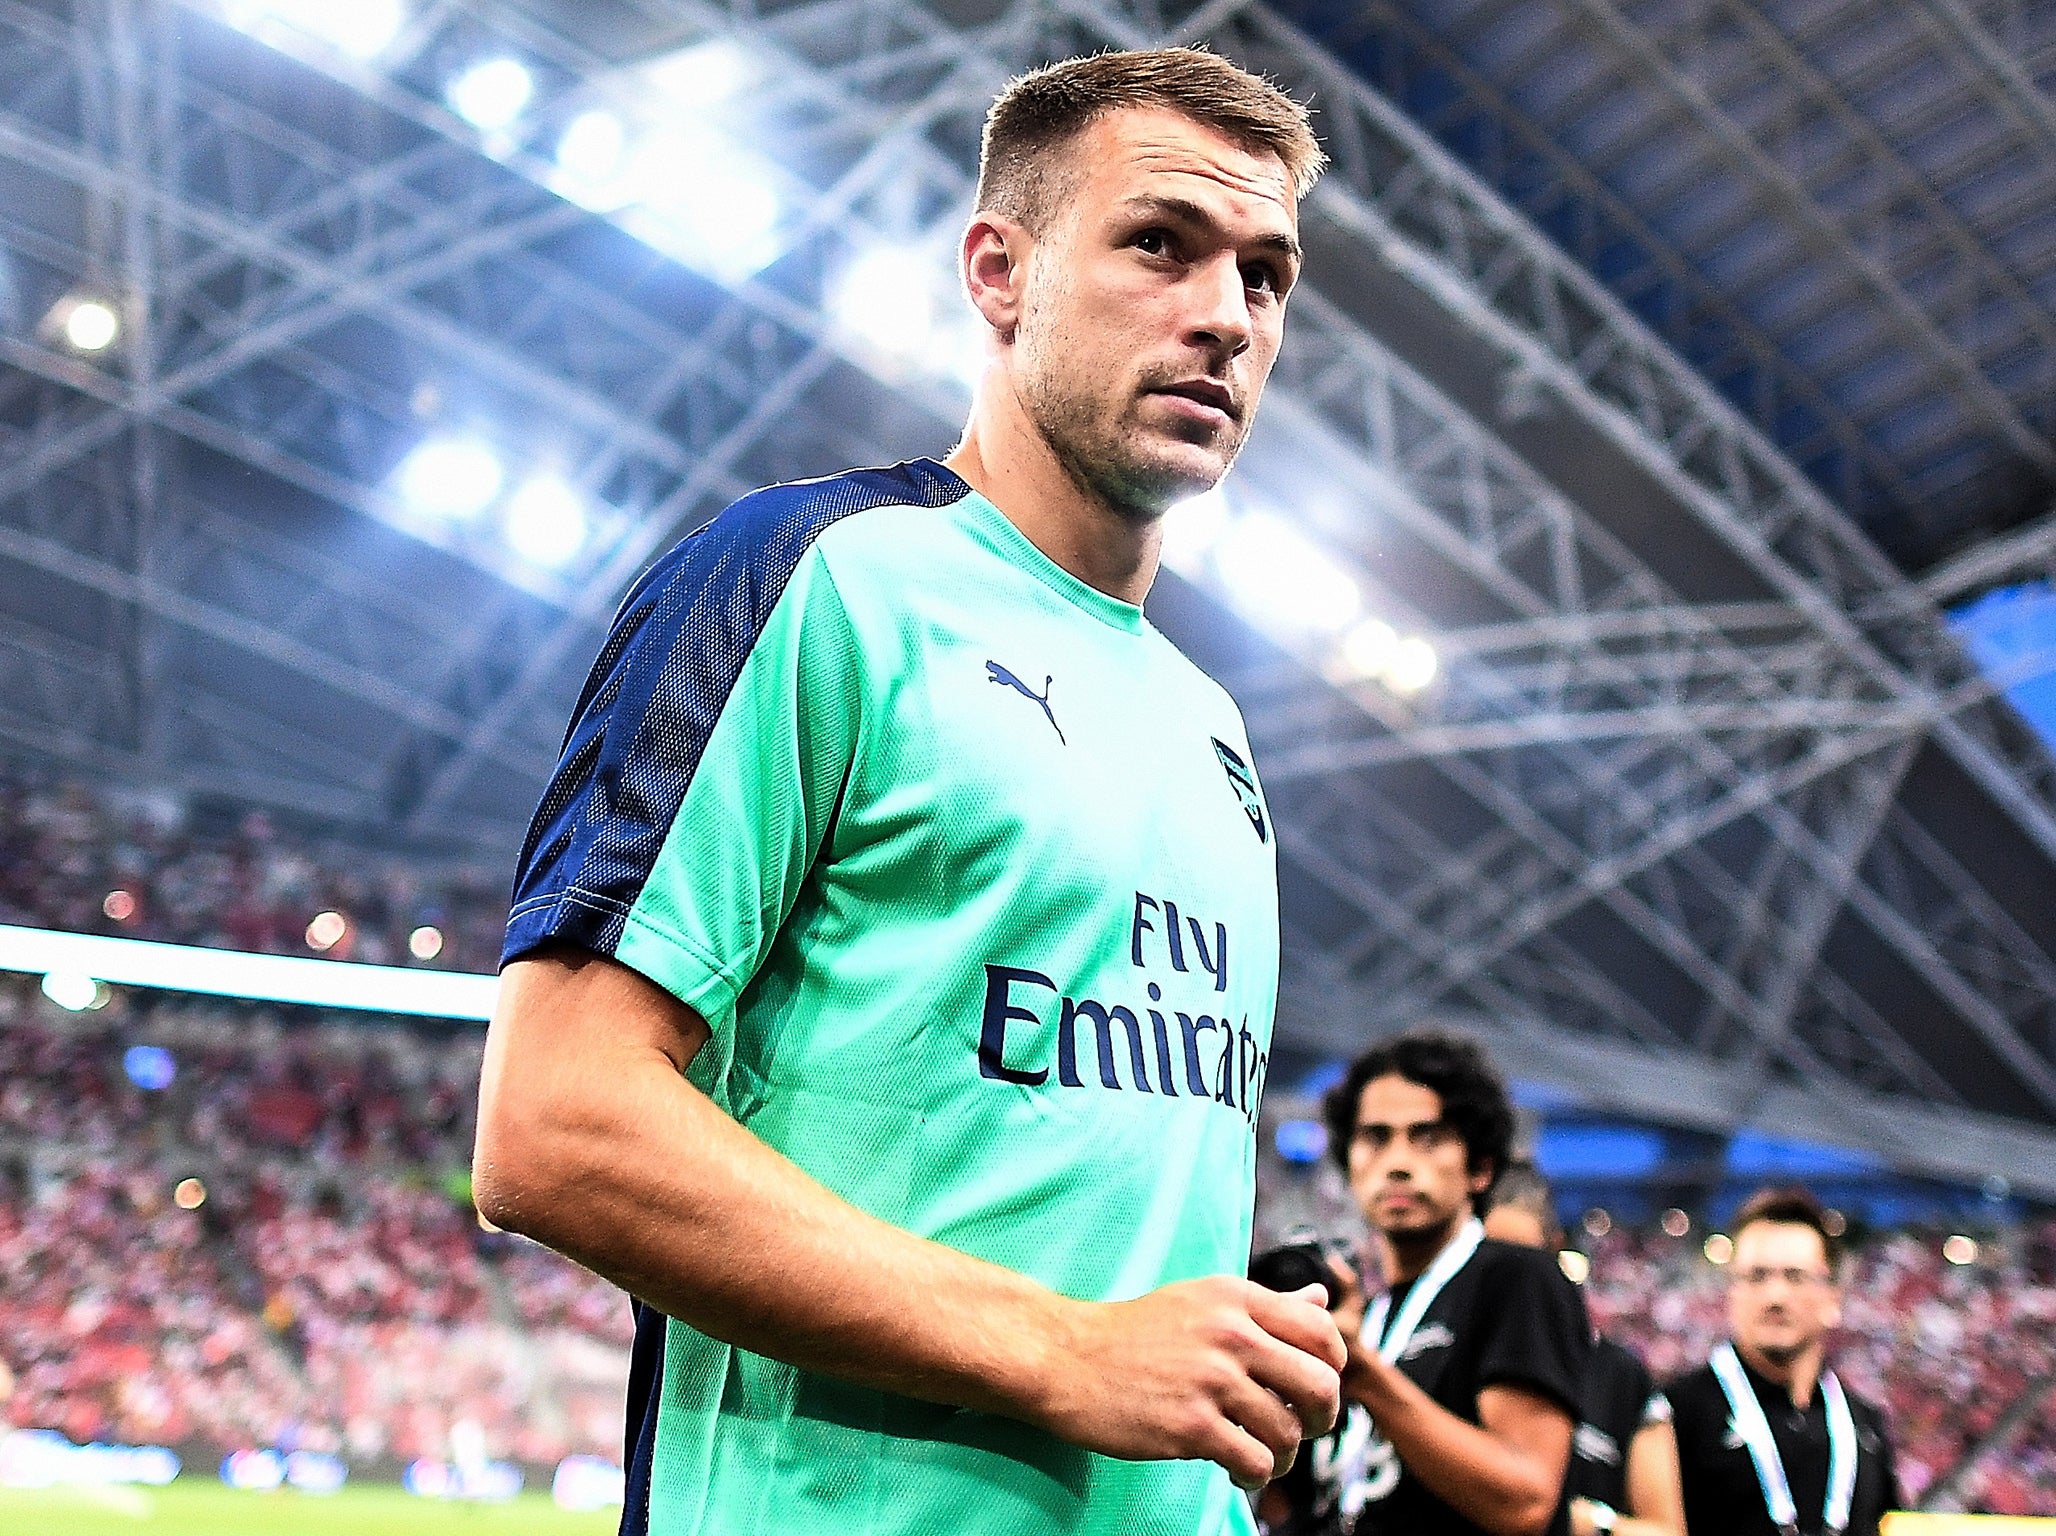 Transfer news, rumours - as it happened: Liverpool to rival Chelsea for Aaron Ramsey, Manchester United chase Yerry Mina, Arsenal target World Cup star